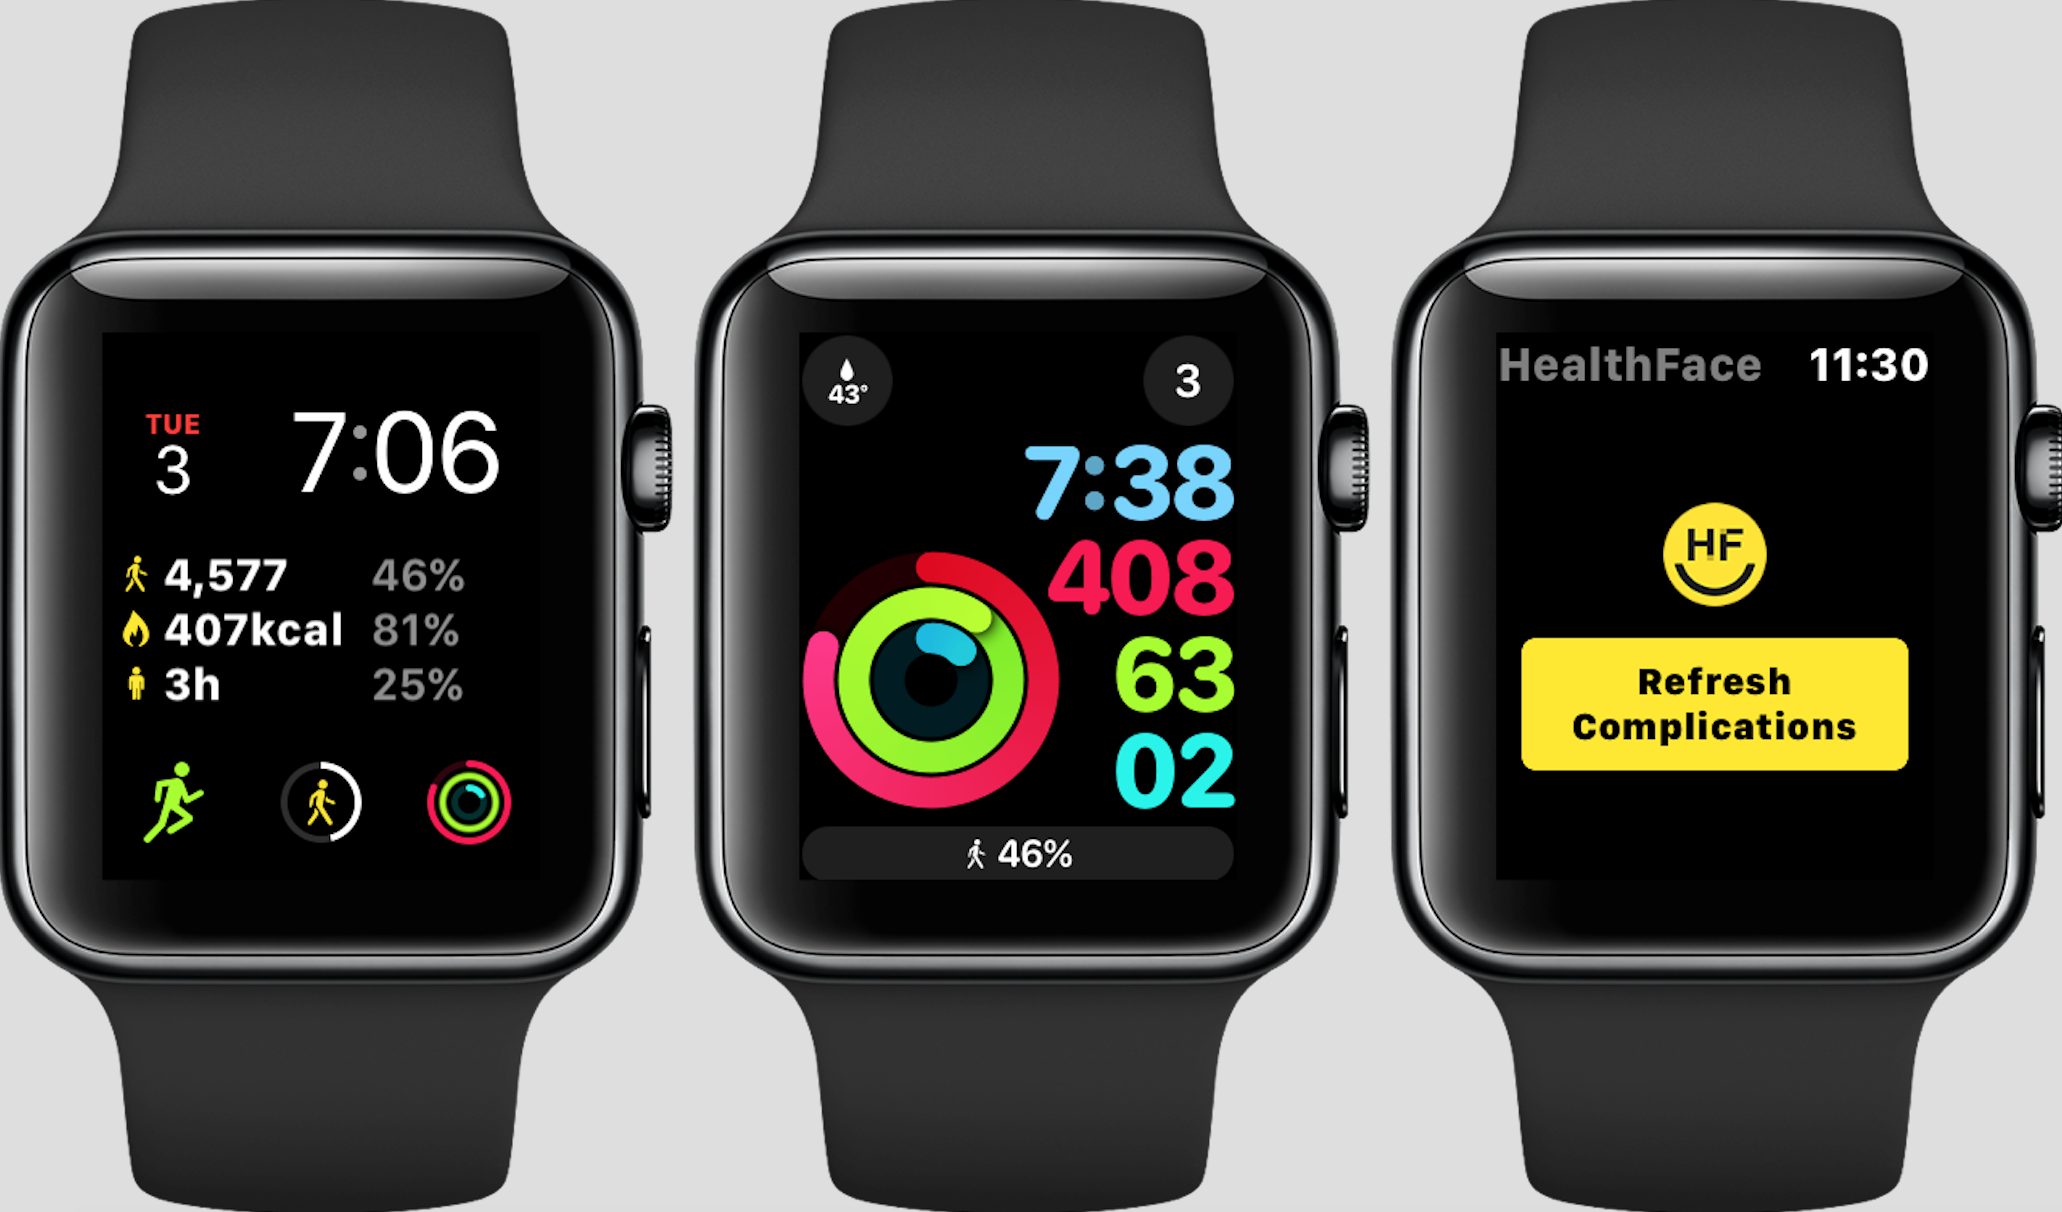 HealthFace Puts Your Health Data on your Watch Face